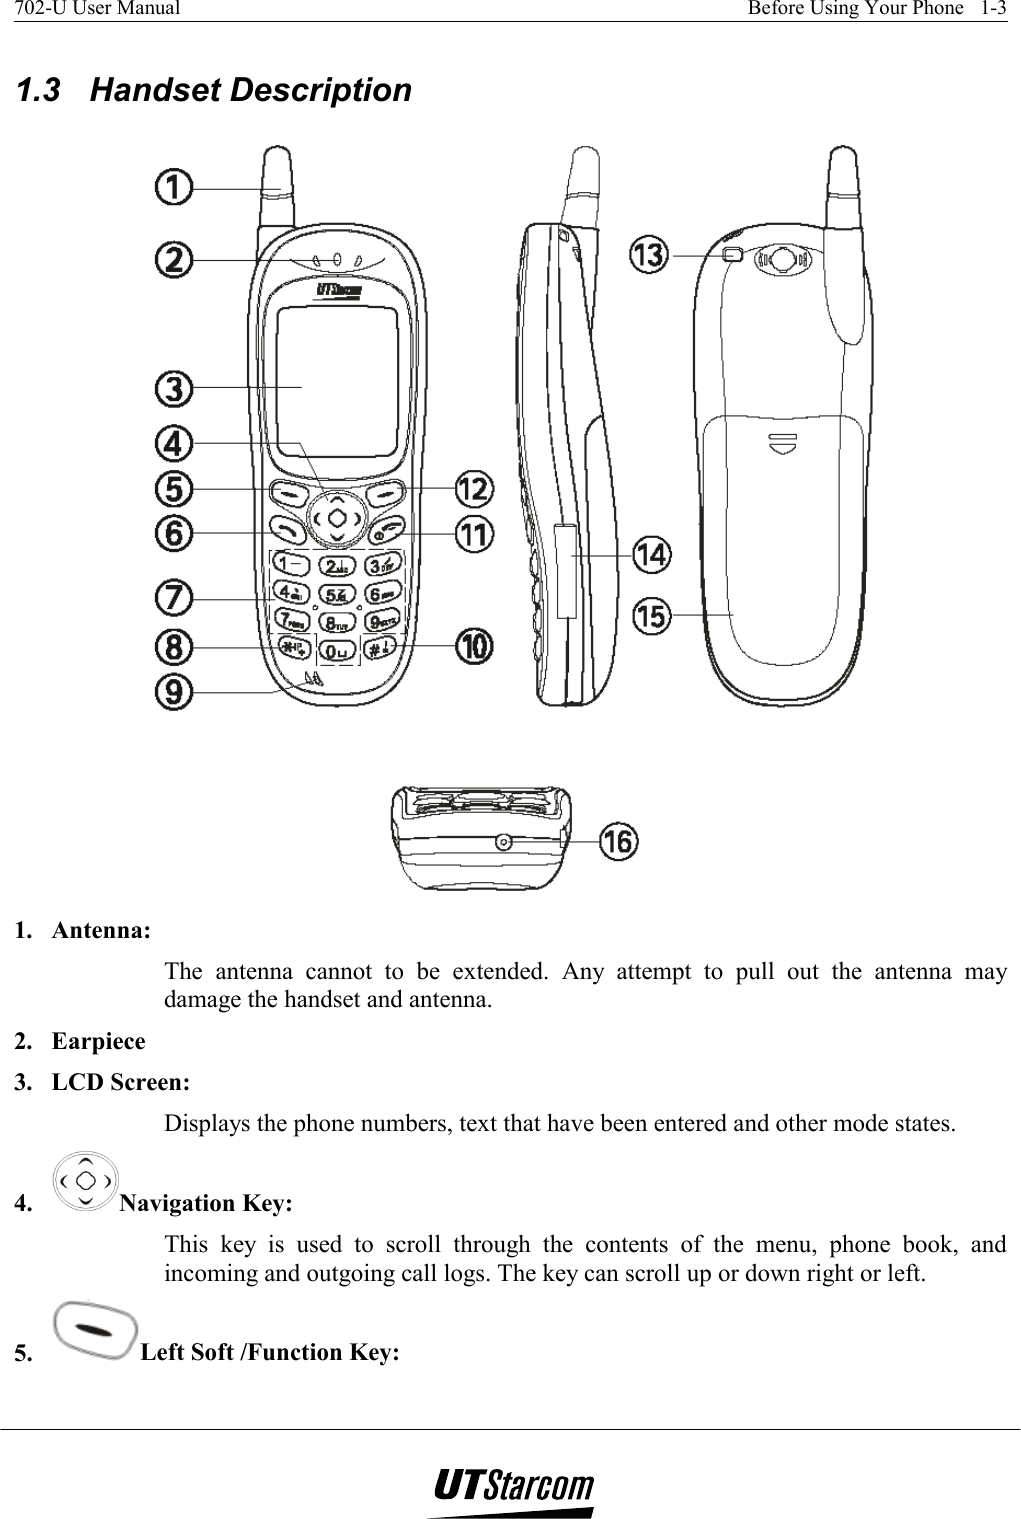 702-U User Manual    Before Using Your Phone   1-3   1.3 Handset Description   1. Antenna: The antenna cannot to be extended. Any attempt to pull out the antenna may damage the handset and antenna. 2. Earpiece 3. LCD Screen: Displays the phone numbers, text that have been entered and other mode states. 4.  Navigation Key: This key is used to scroll through the contents of the menu, phone book, and incoming and outgoing call logs. The key can scroll up or down right or left. 5.  Left Soft /Function Key:  